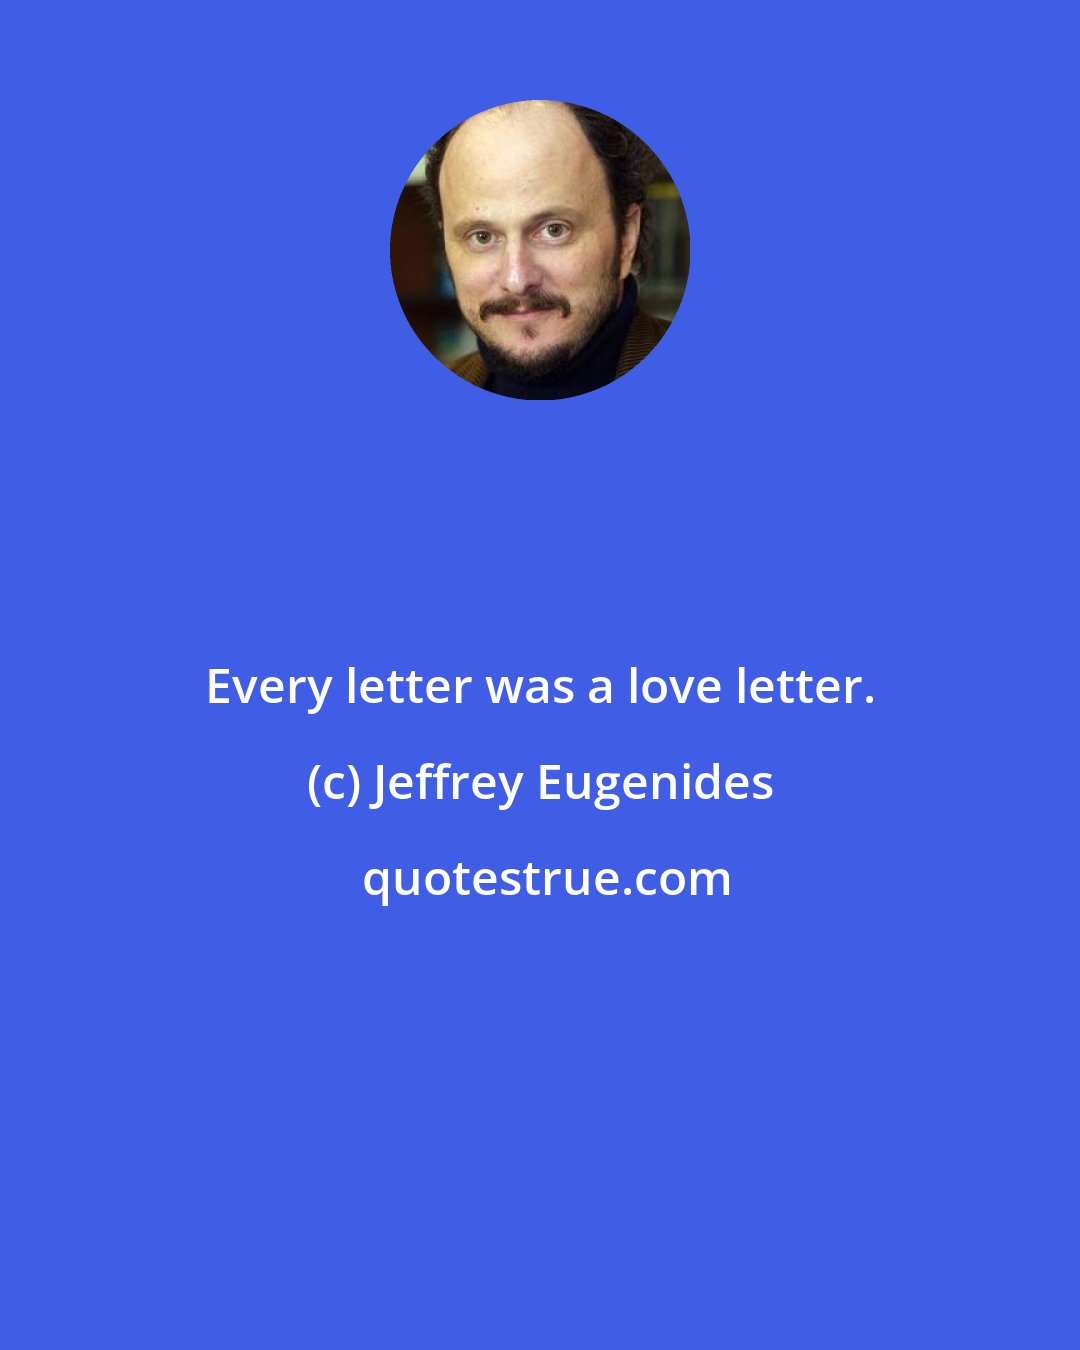 Jeffrey Eugenides: Every letter was a love letter.